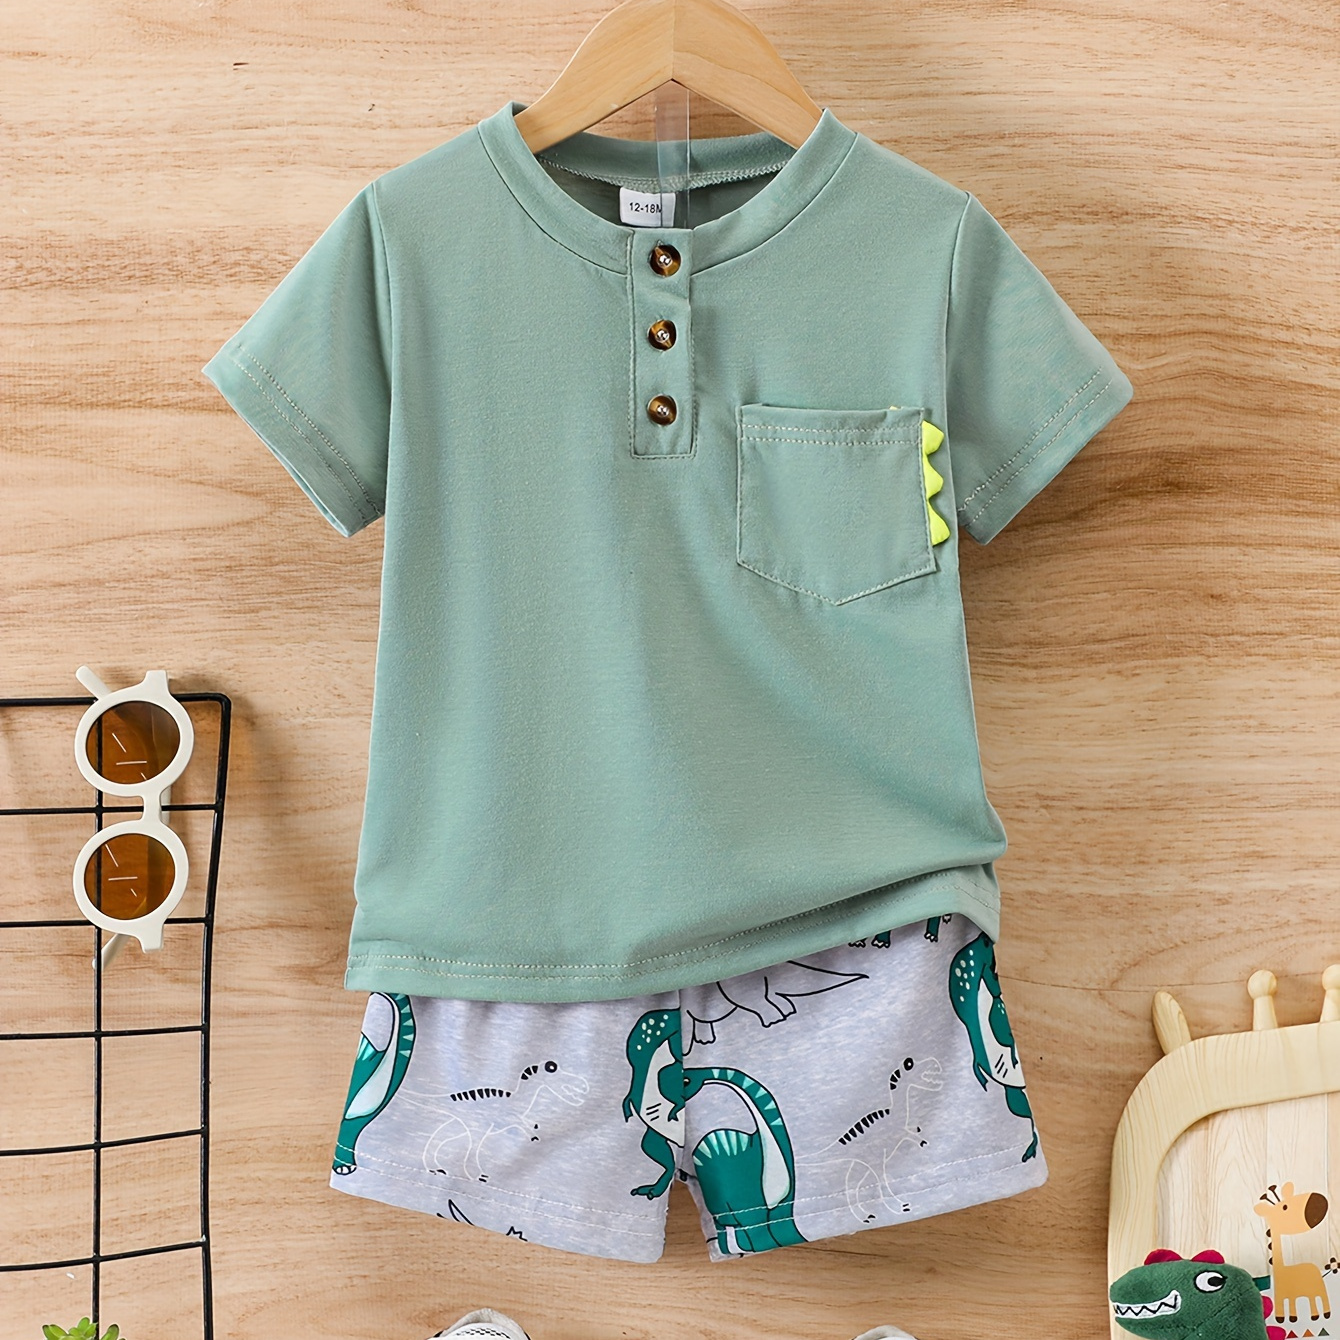 

2pcs Cartoon Dinosaur Print Casual Outfit For Infant & Toddler, Button Decor T-shirt & Elastic Waist Shorts, Baby Boy's Clothes For Beach Vacation Outwear